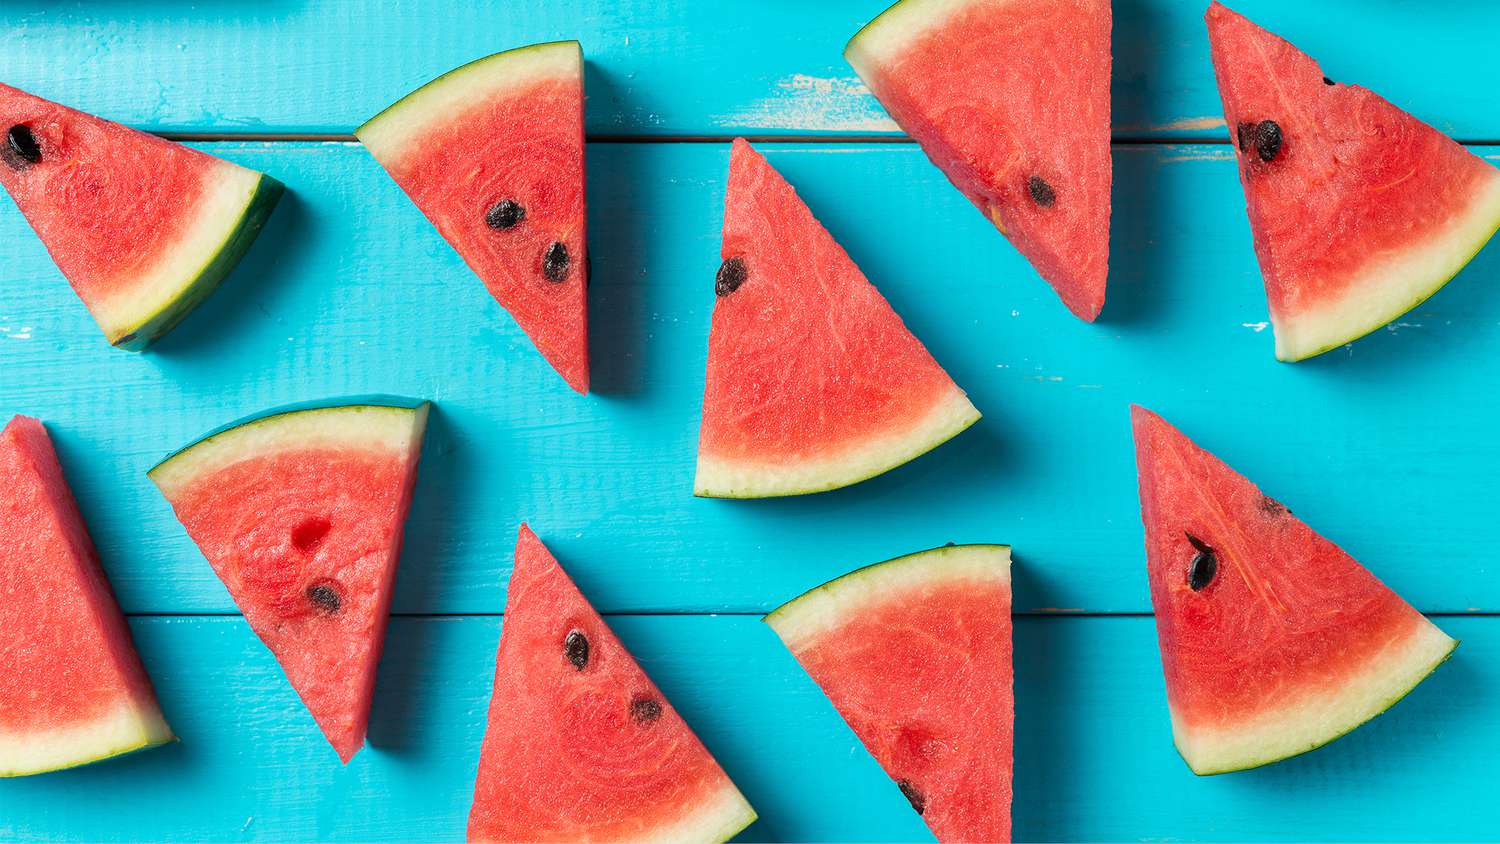 slices of watermelon on a teal wood surface